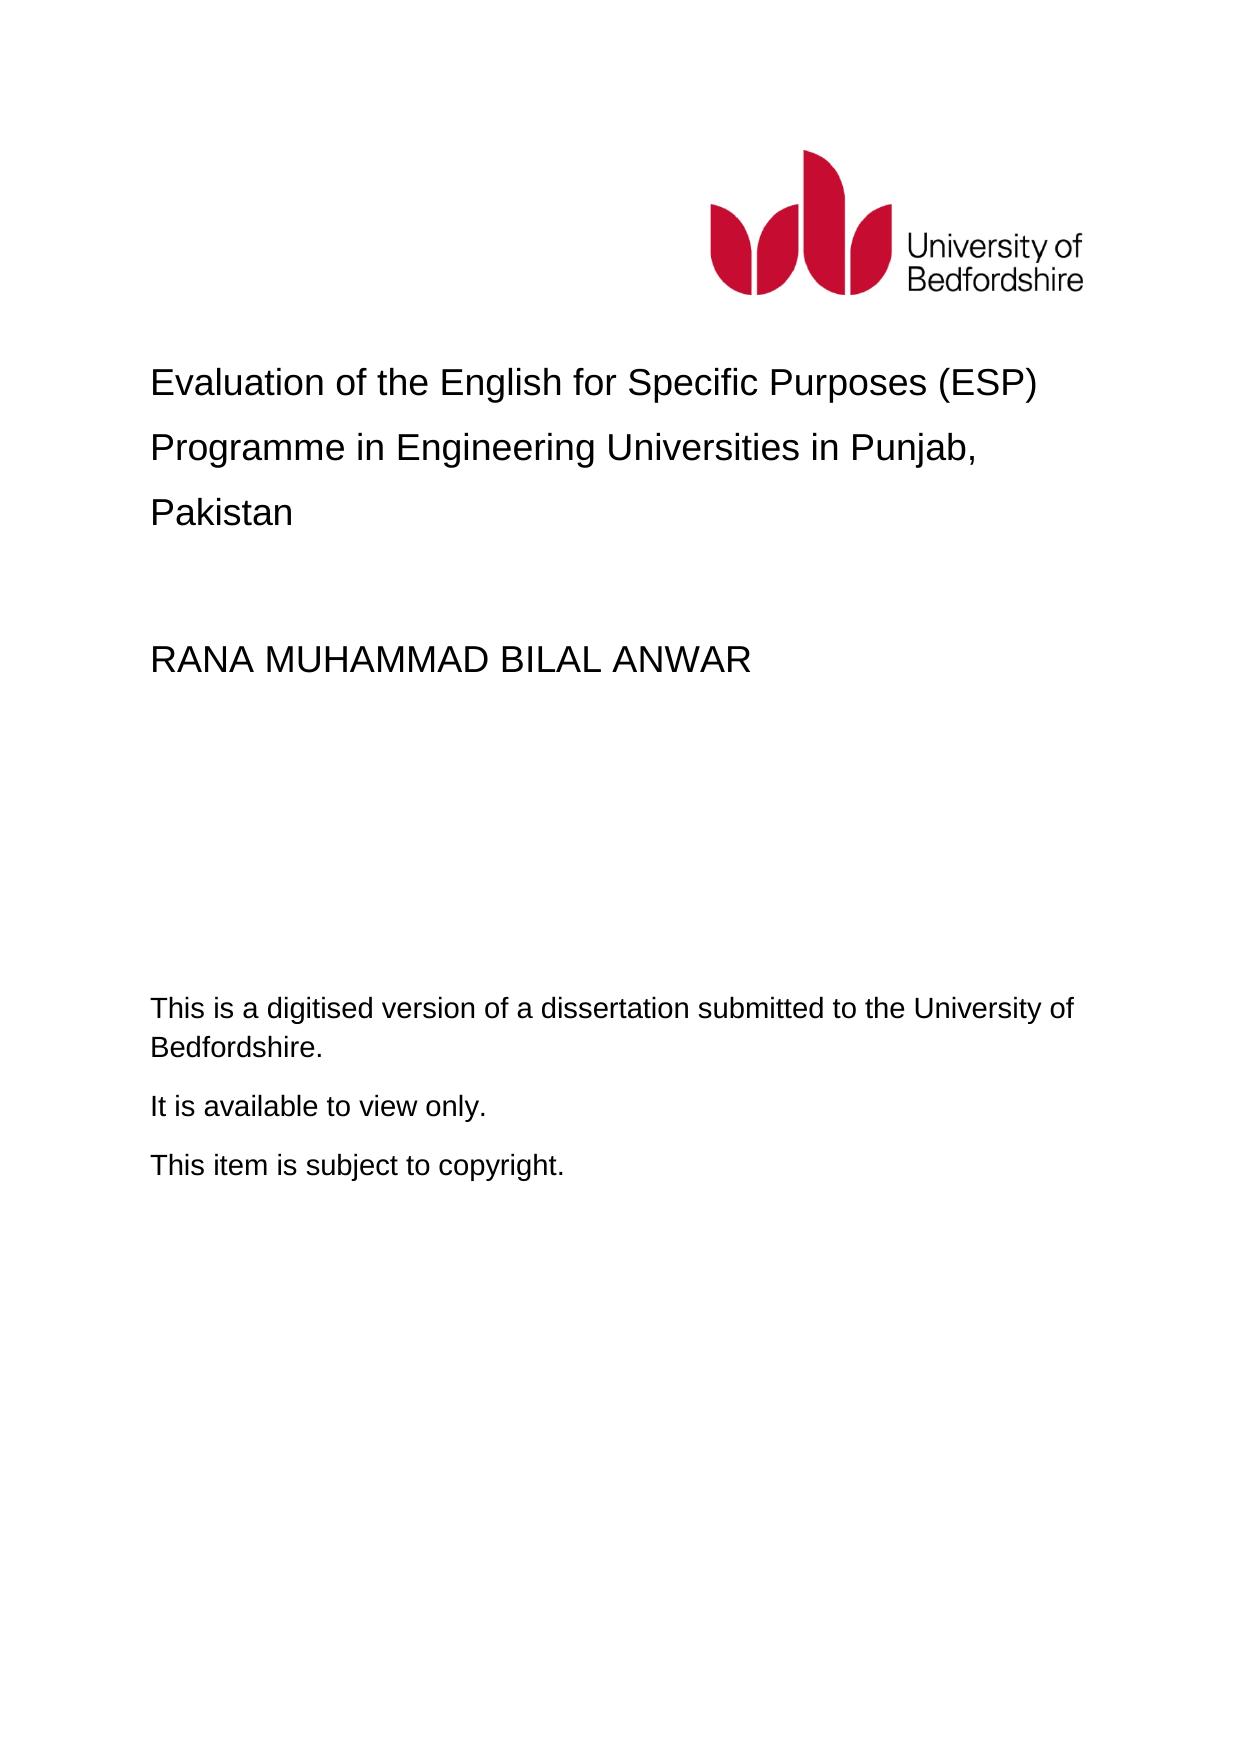 Evaluation of the English for Specific Purposes (ESP) 2016